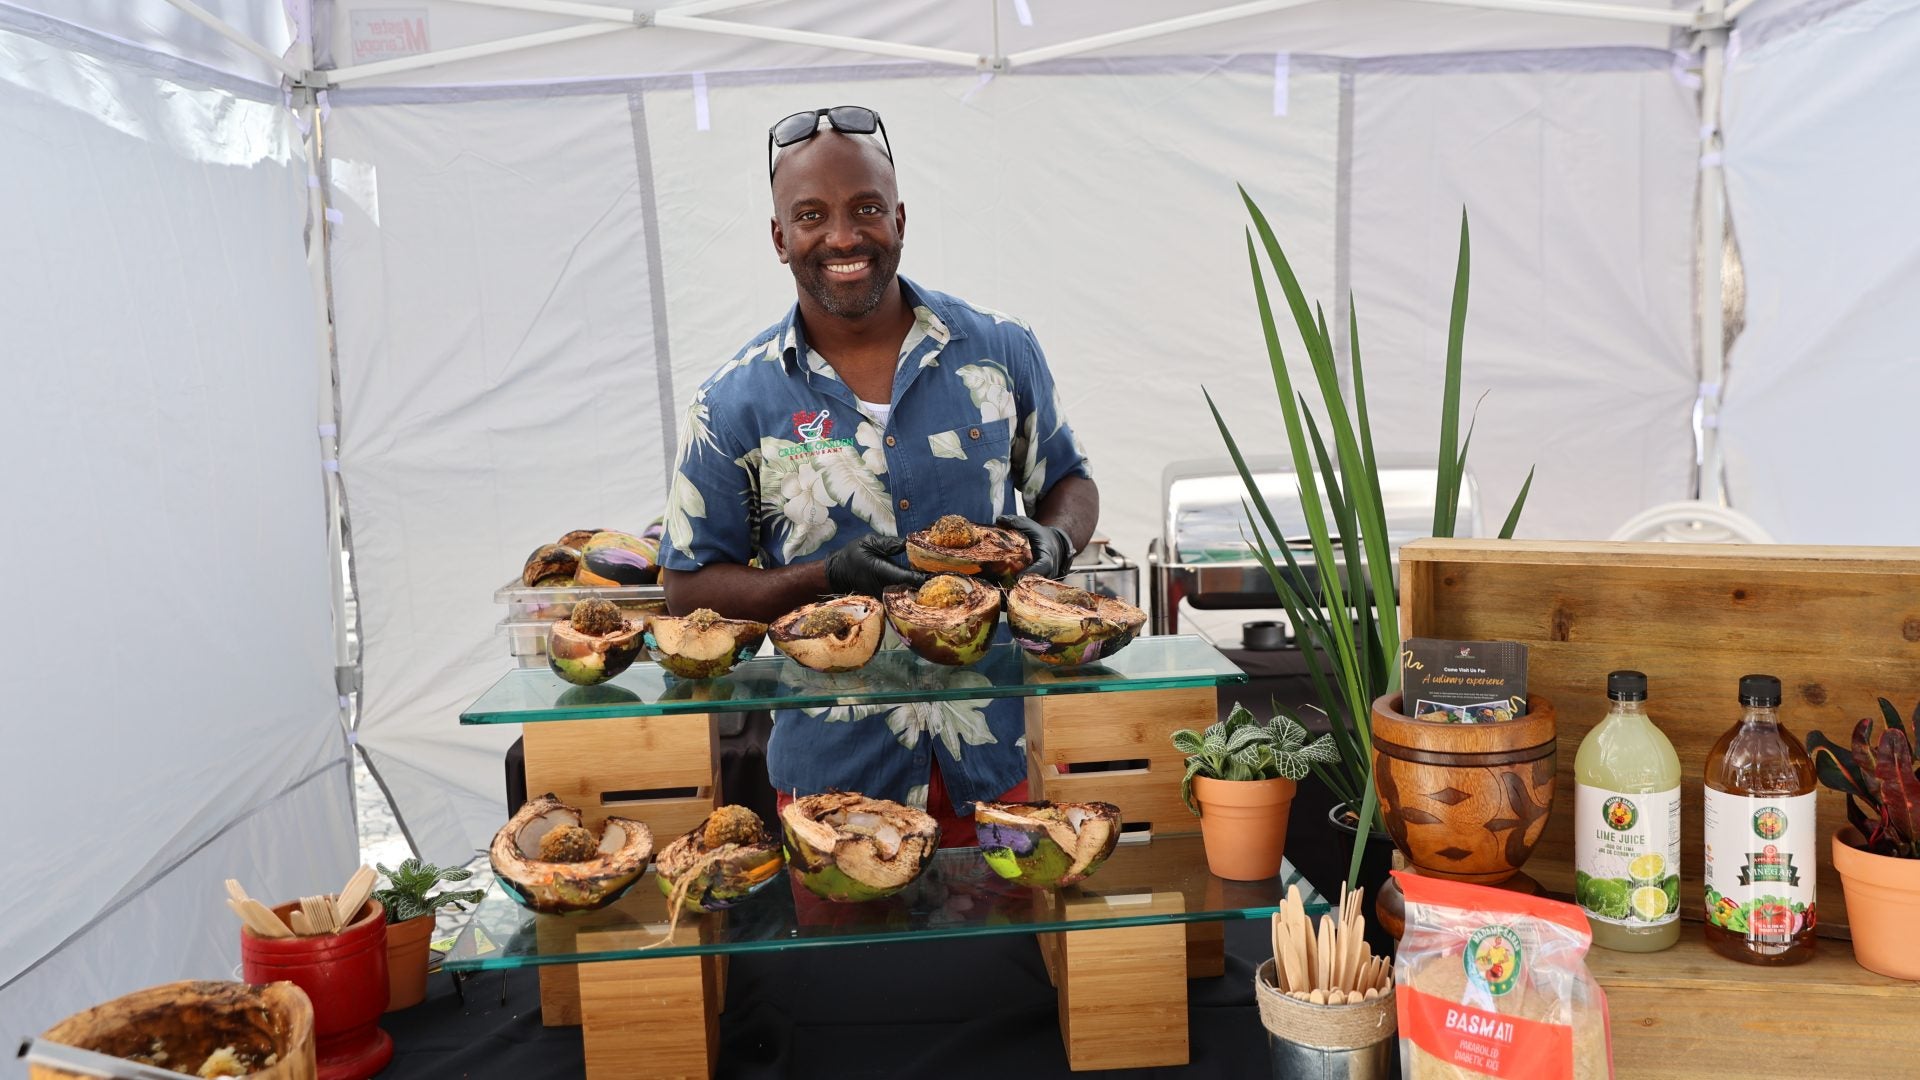 Savoring Heritage: The Creole Food Festival Celebrates Diverse Flavors And Cultural Connections Of The Diaspor